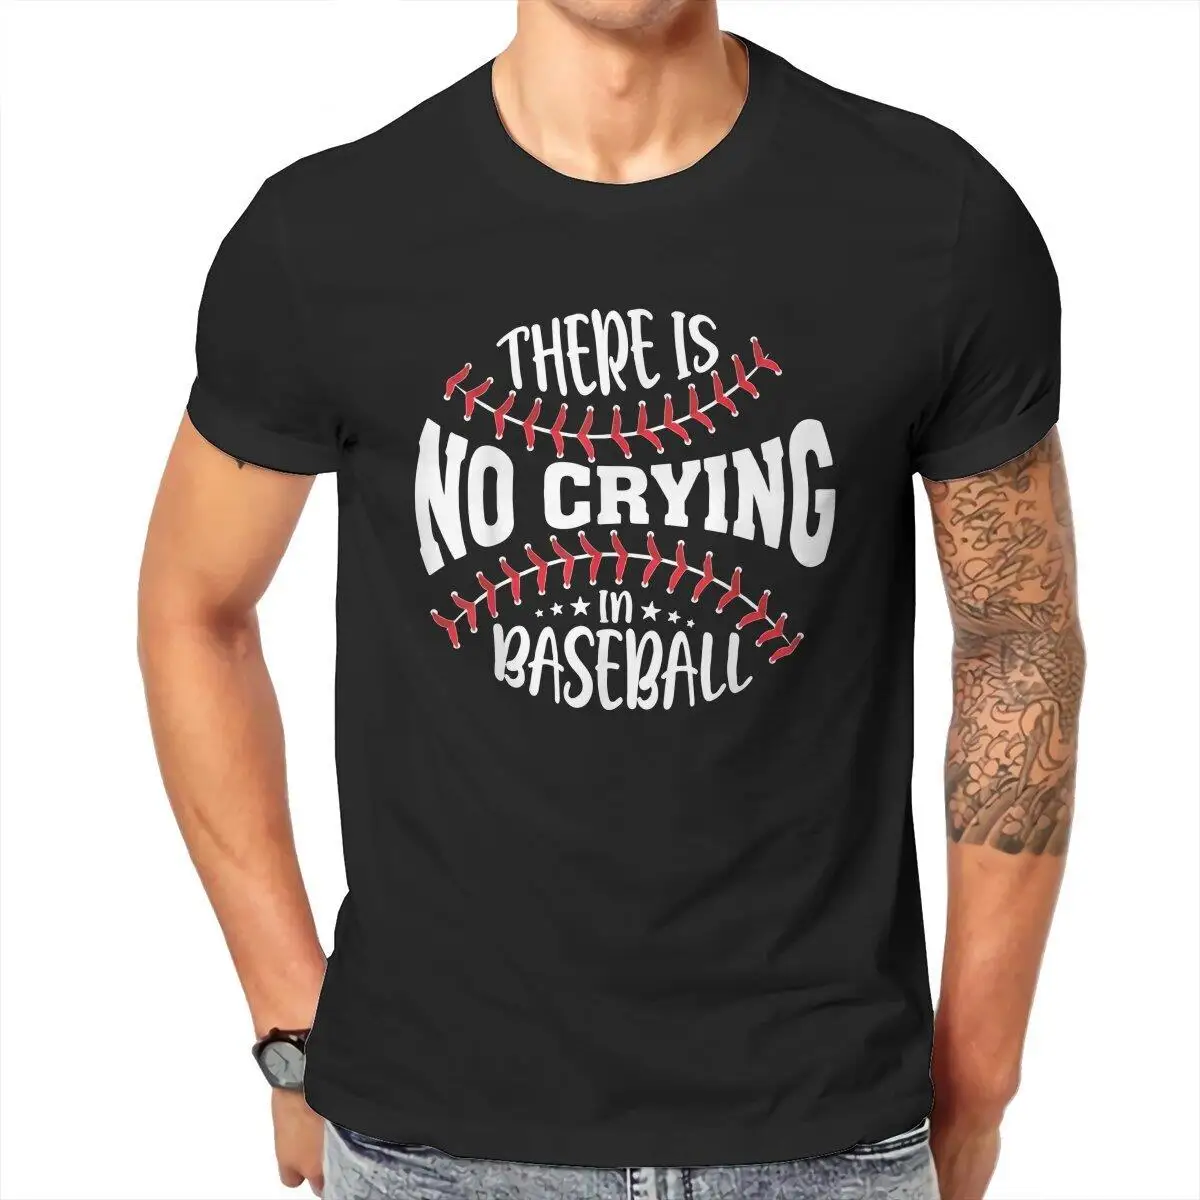 

Men's T-Shirt A League Of Their Own There Is No Crying In Baseball Cotton Tees Short Sleeve T Shirts Round Neck Clothing Gift